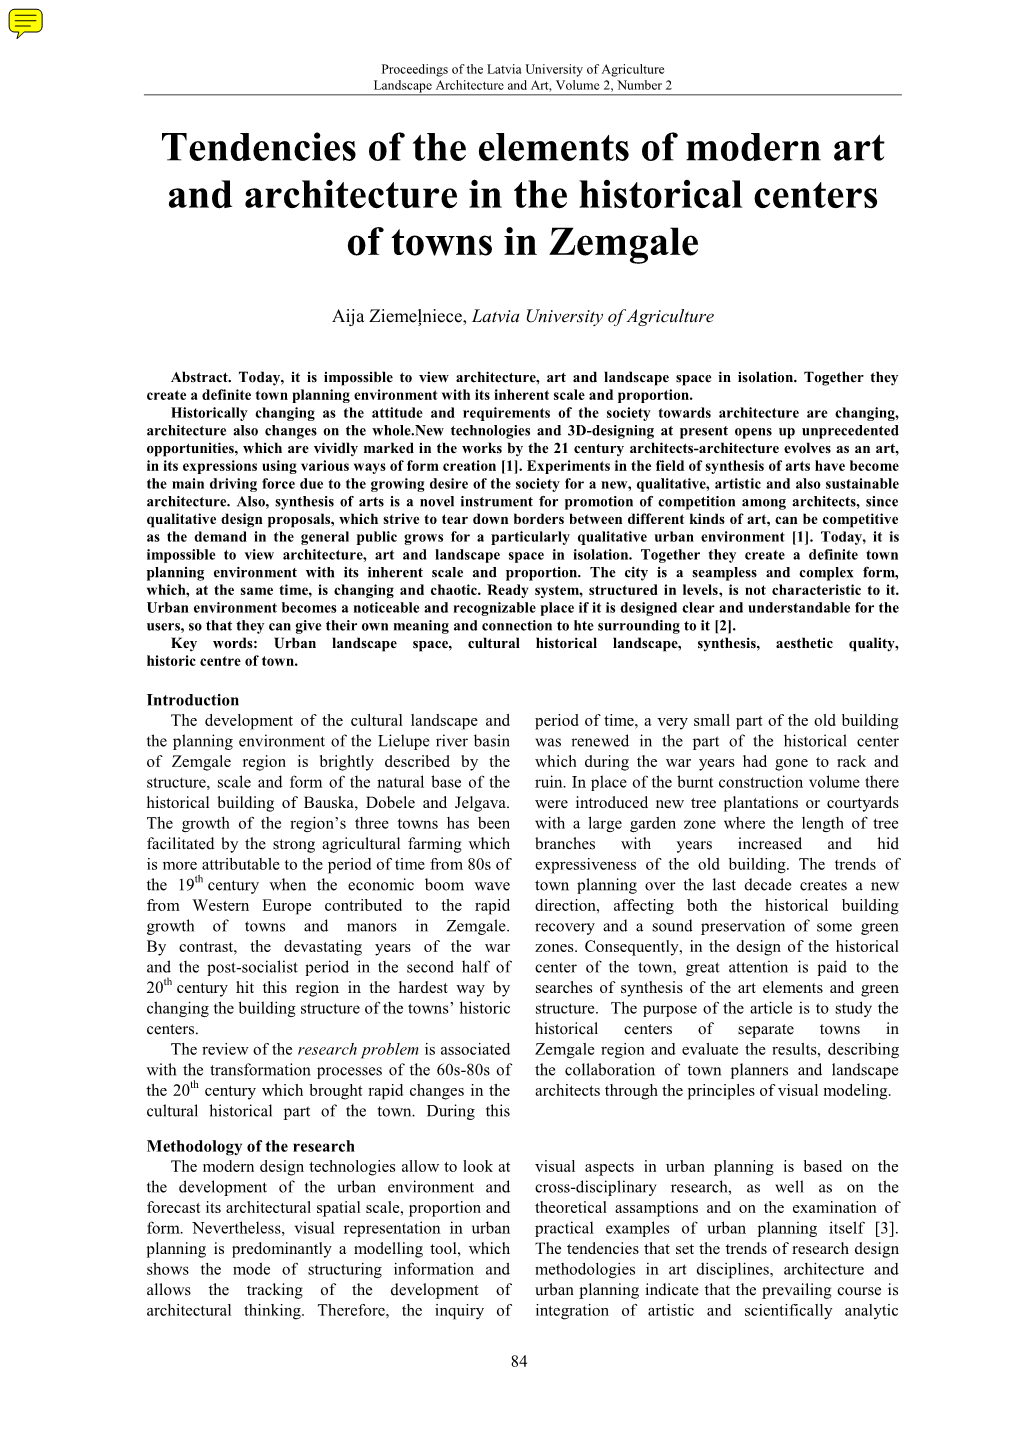 Tendencies of the Elements of Modern Art and Architecture in the Historical Centers of Towns in Zemgale